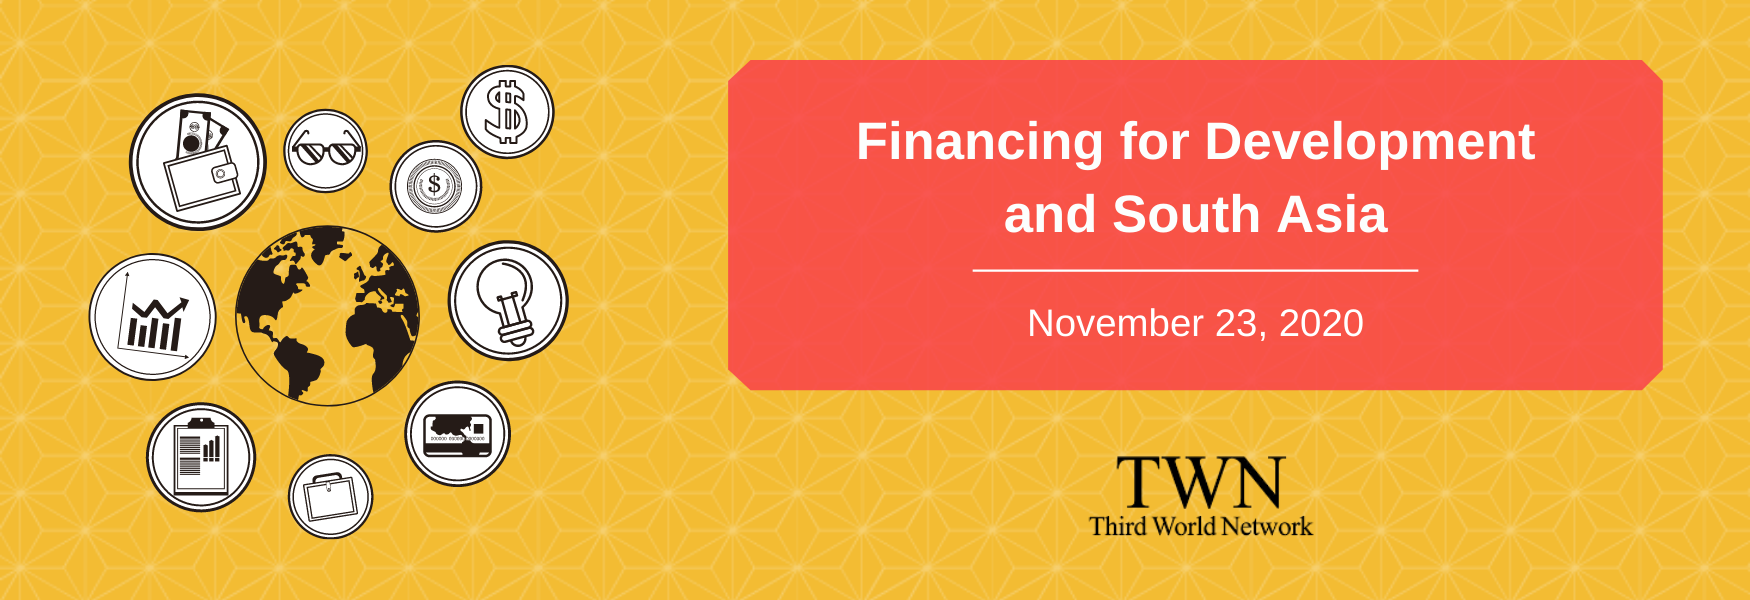 A yellow background with a red box, on which white text reads: Financing for Development and South Asia. November 23, 2020.